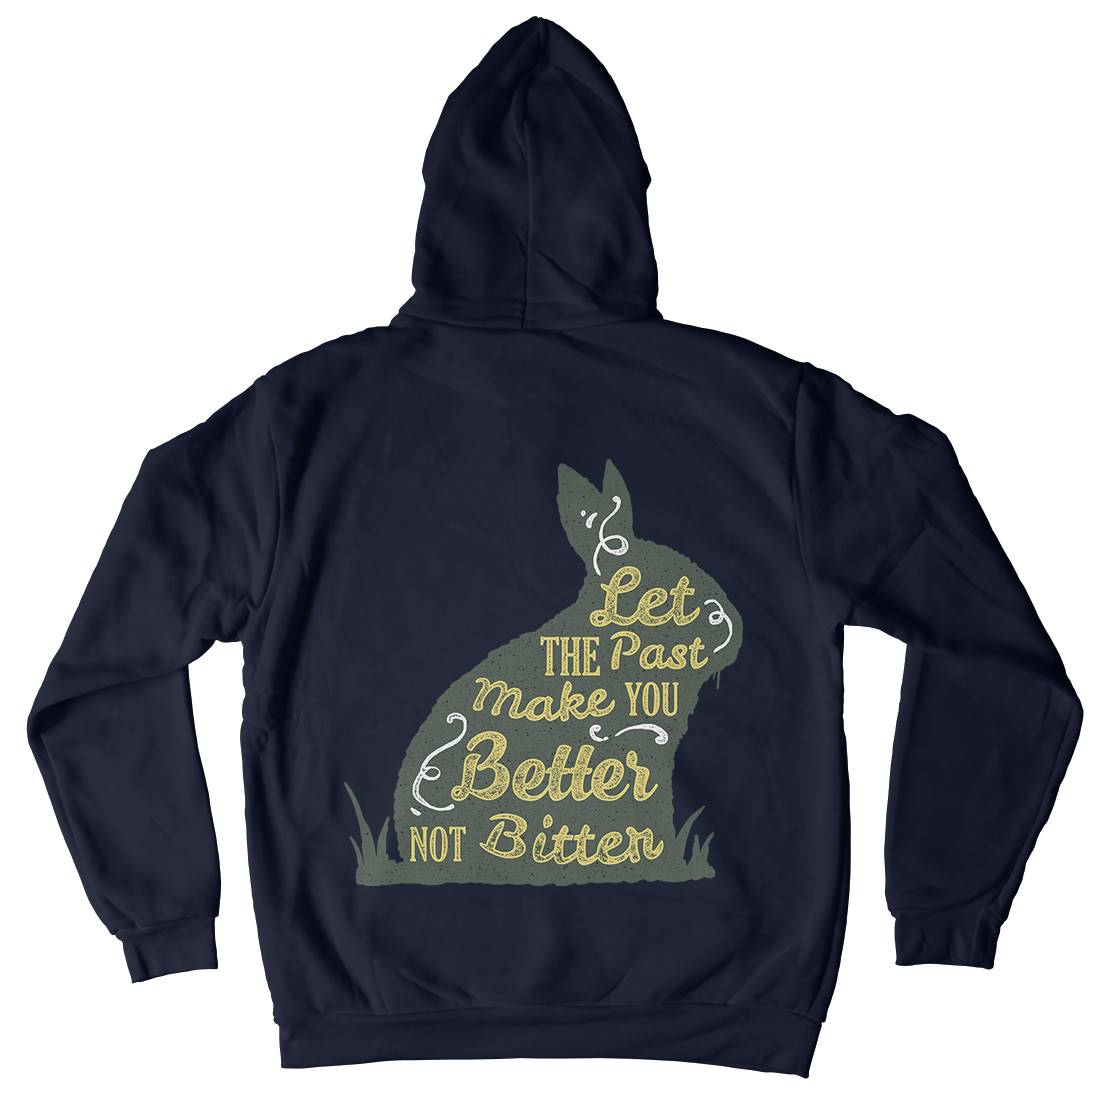 Let The Past Kids Crew Neck Hoodie Quotes A336